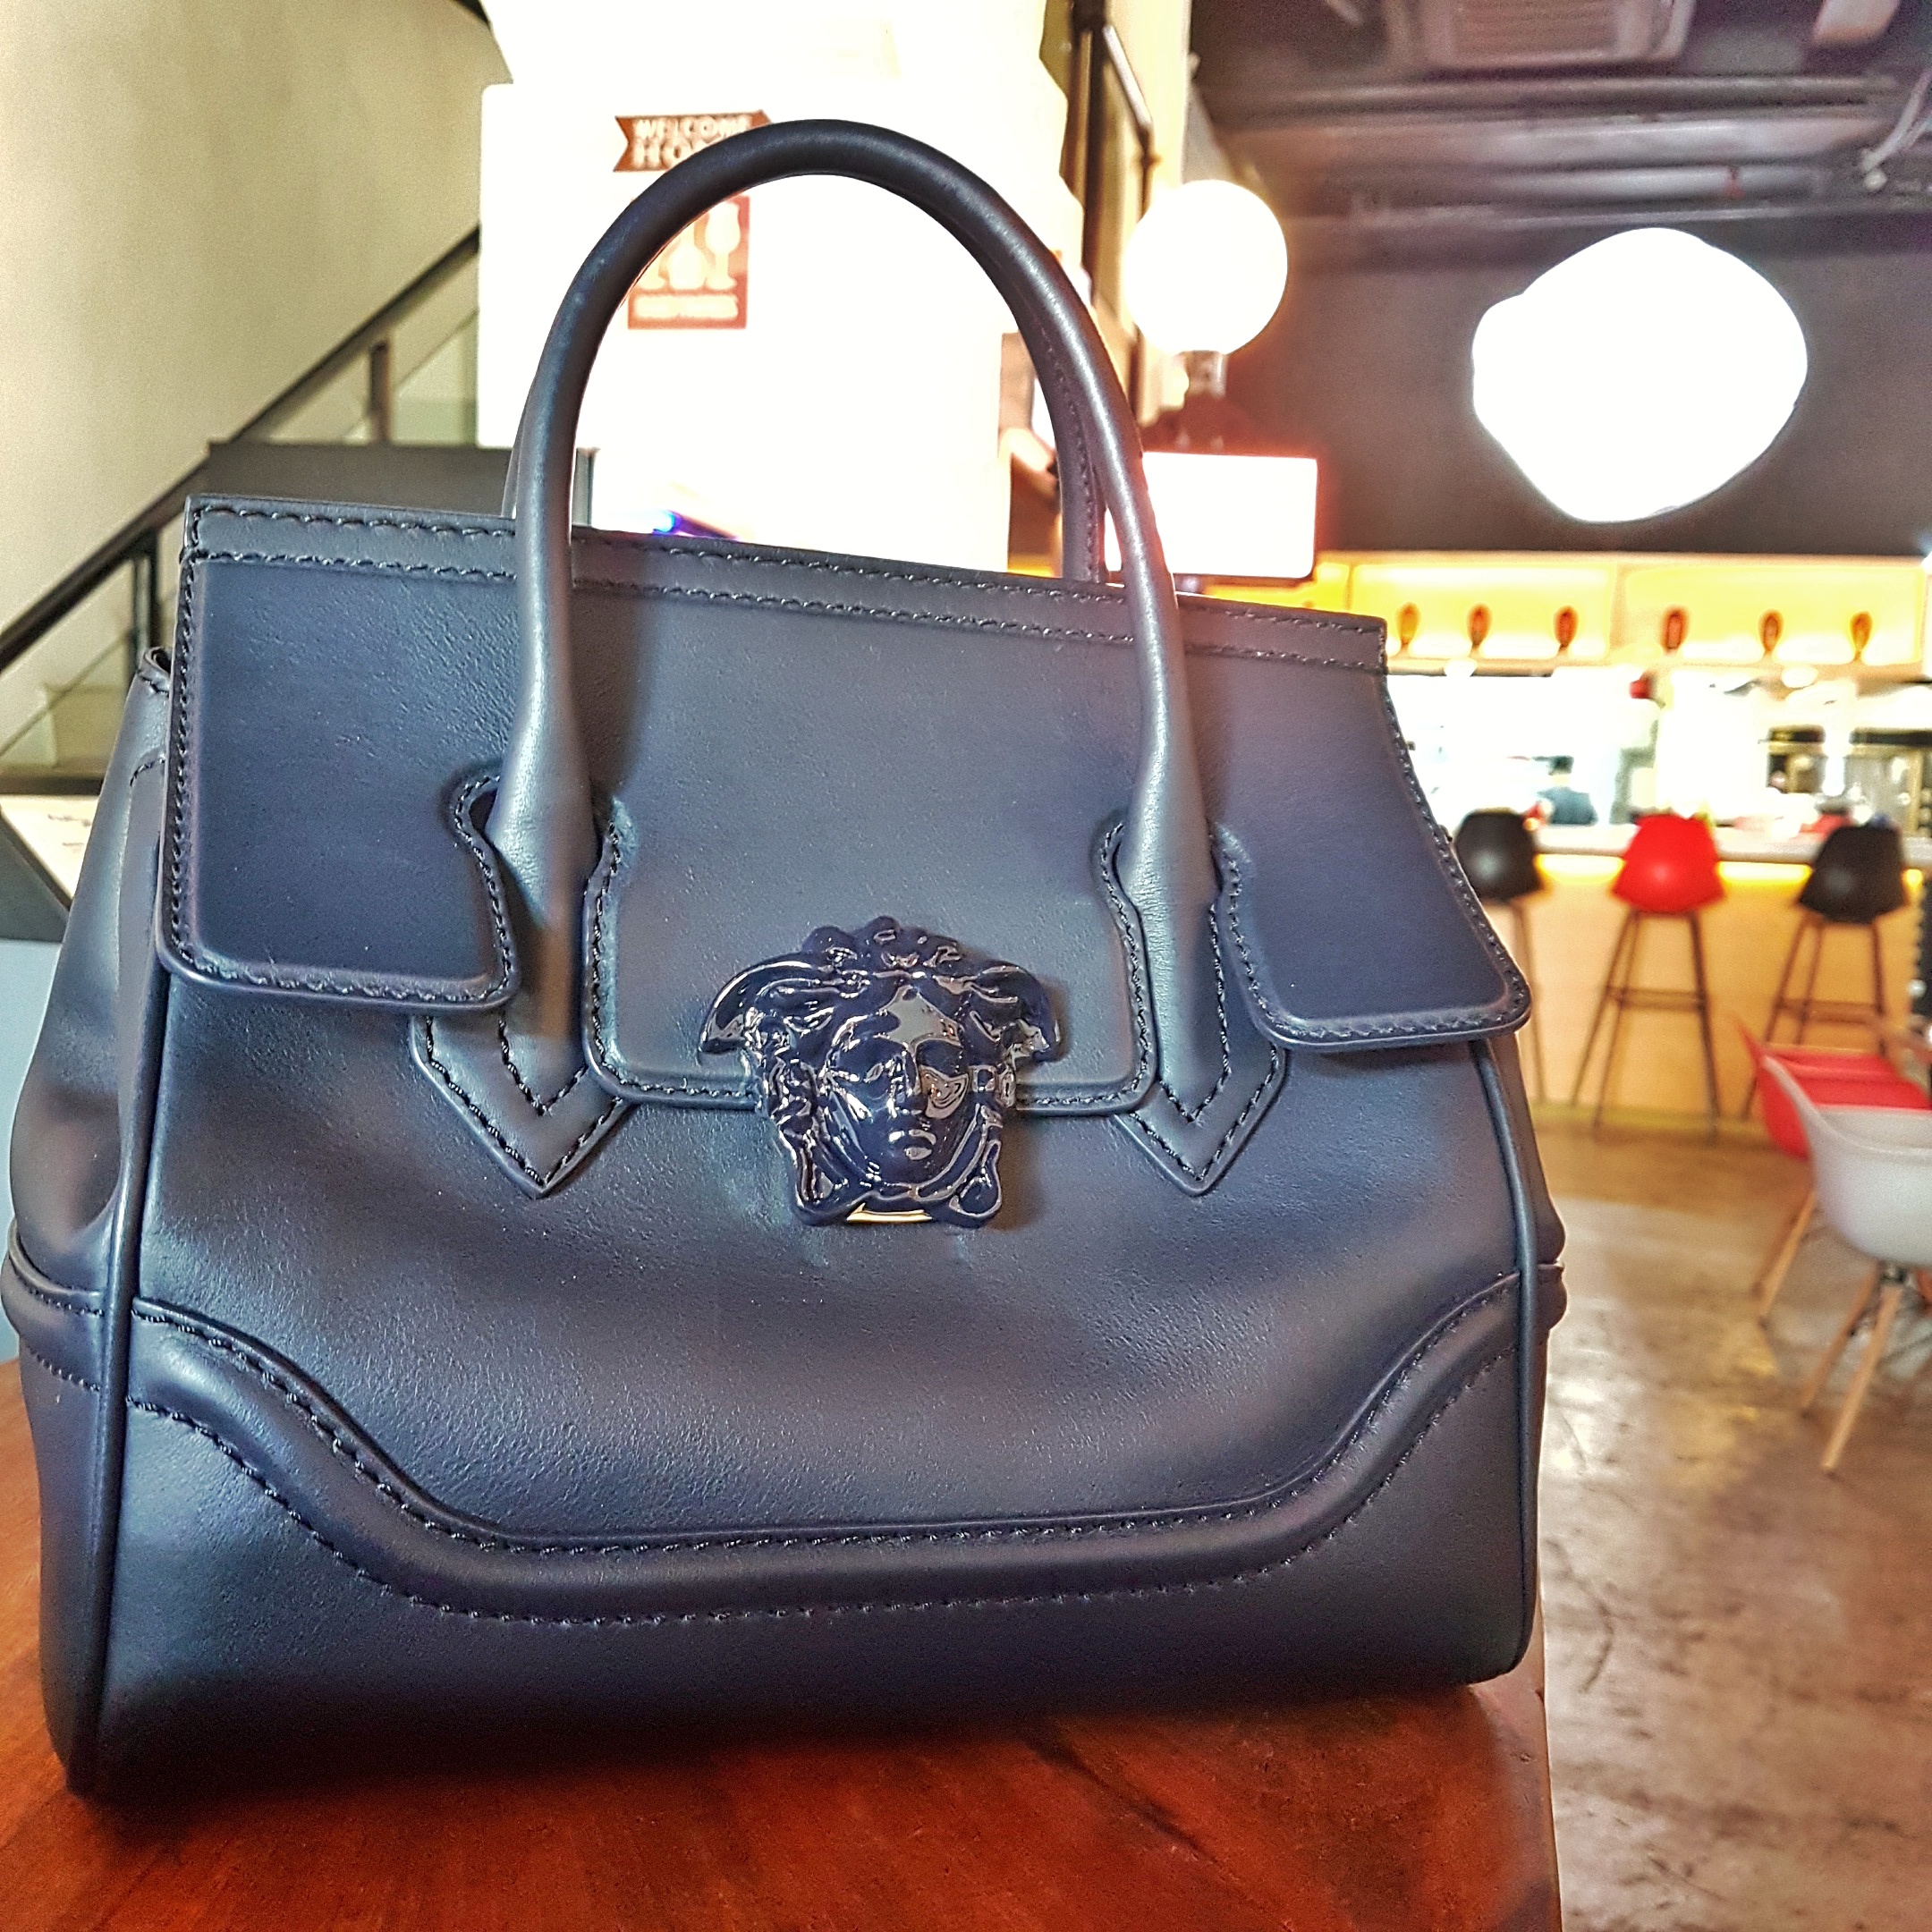 Versace Palazzo Empire Two Way Bag (Review + What fits?) - Discontinued 